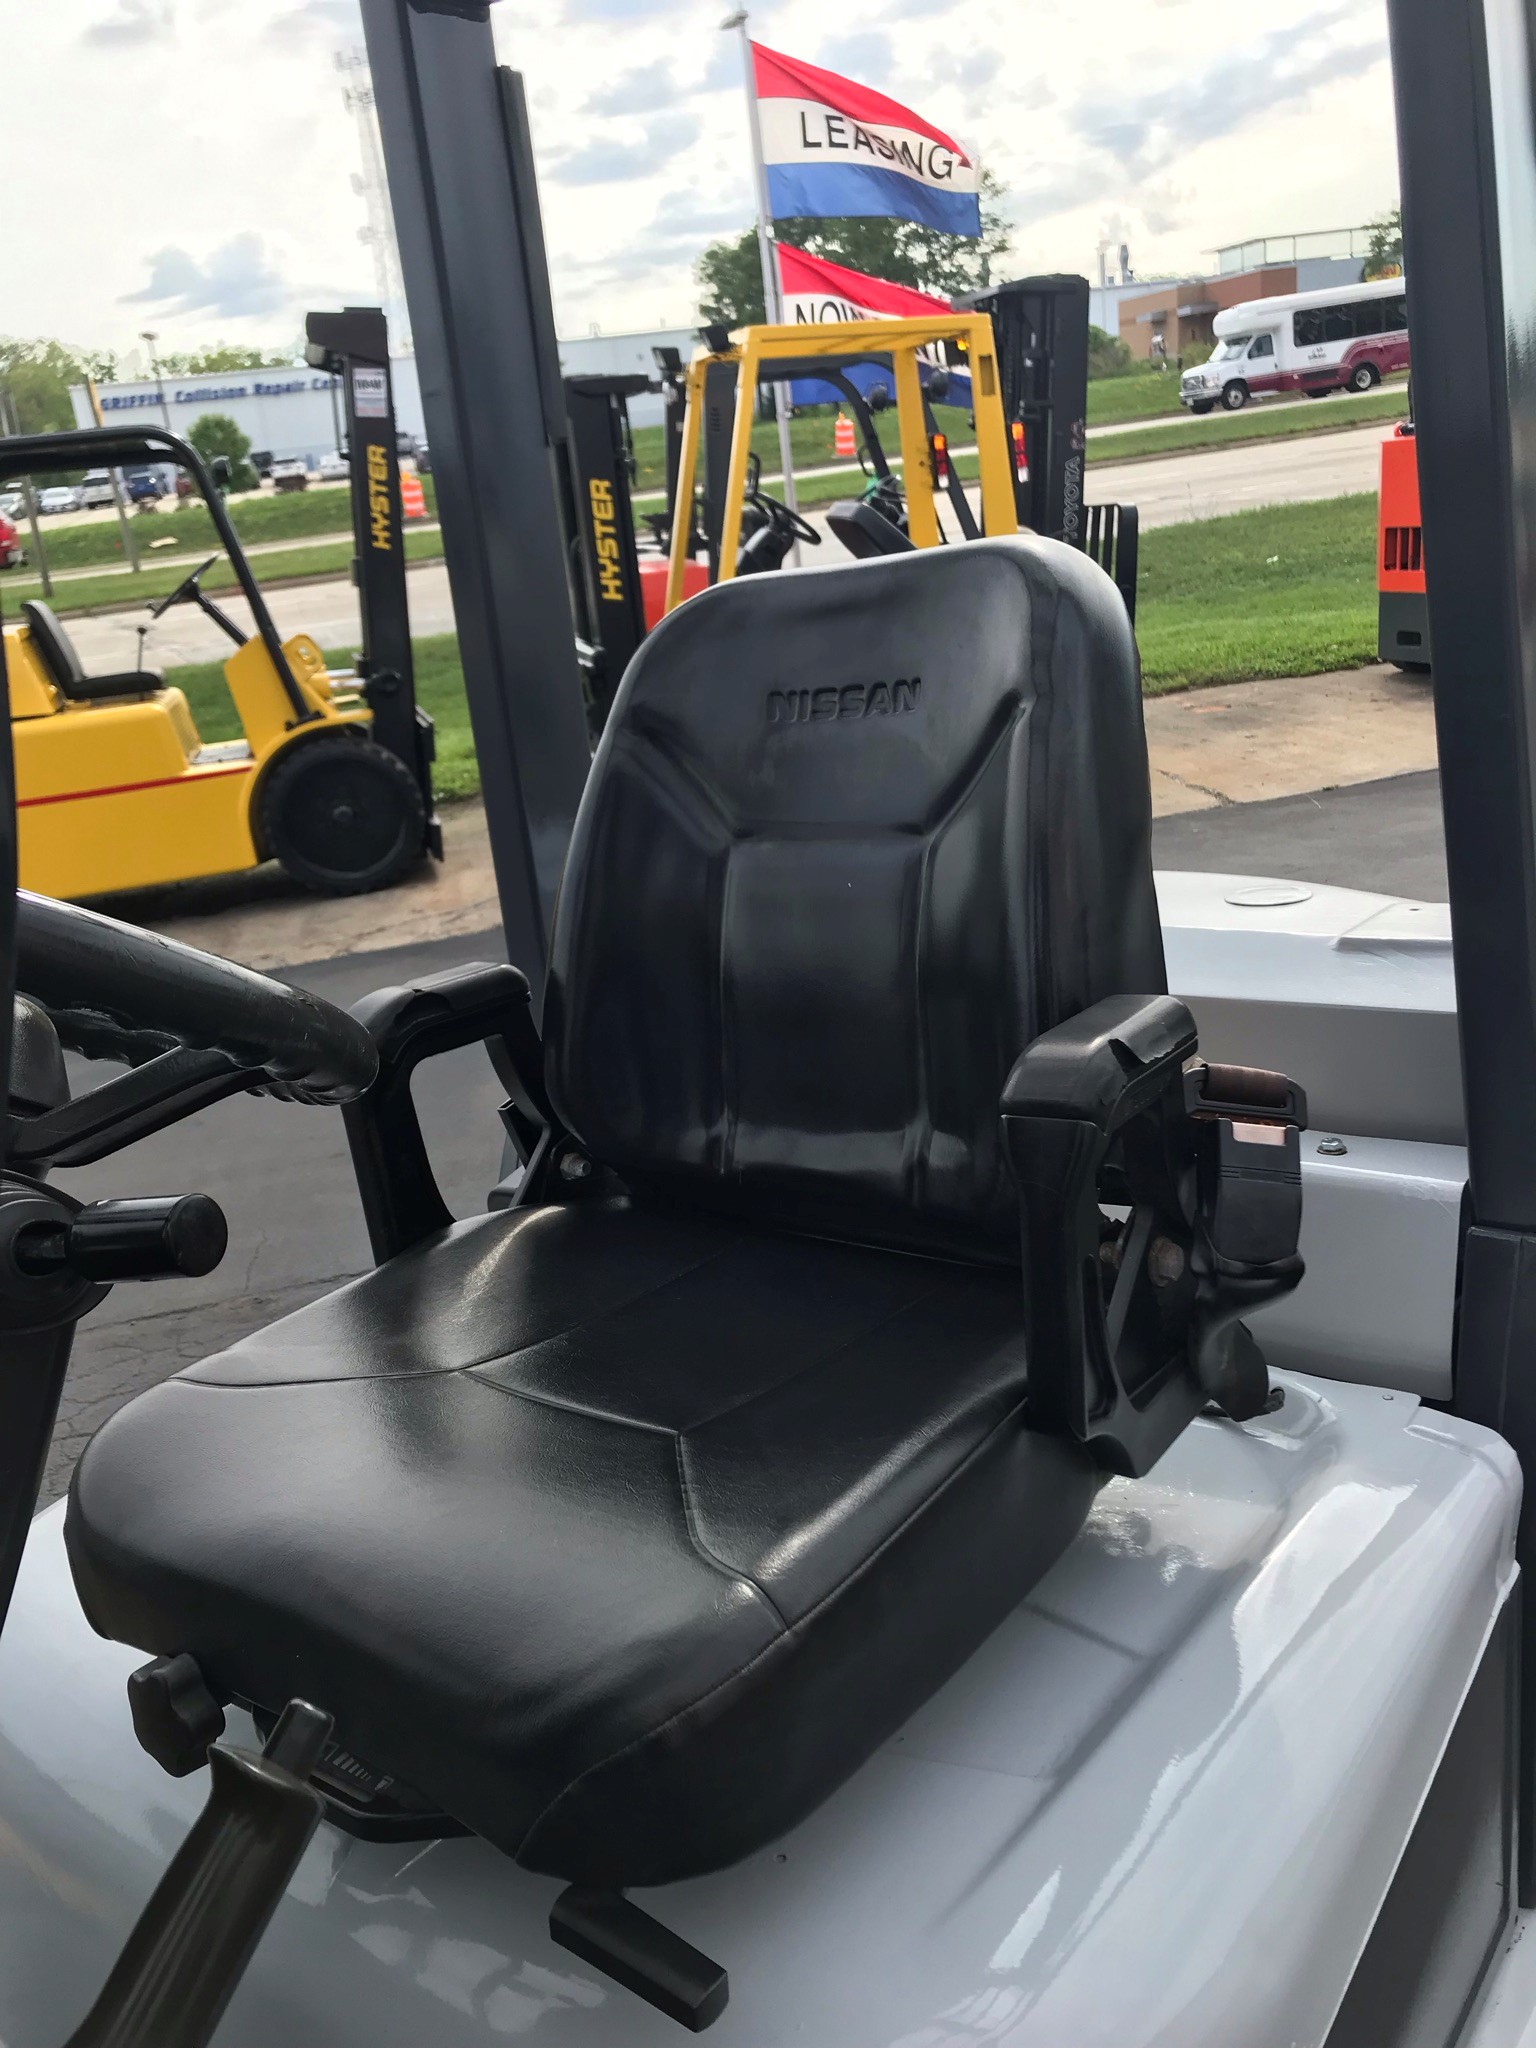 Gas white nissan forklift for sale